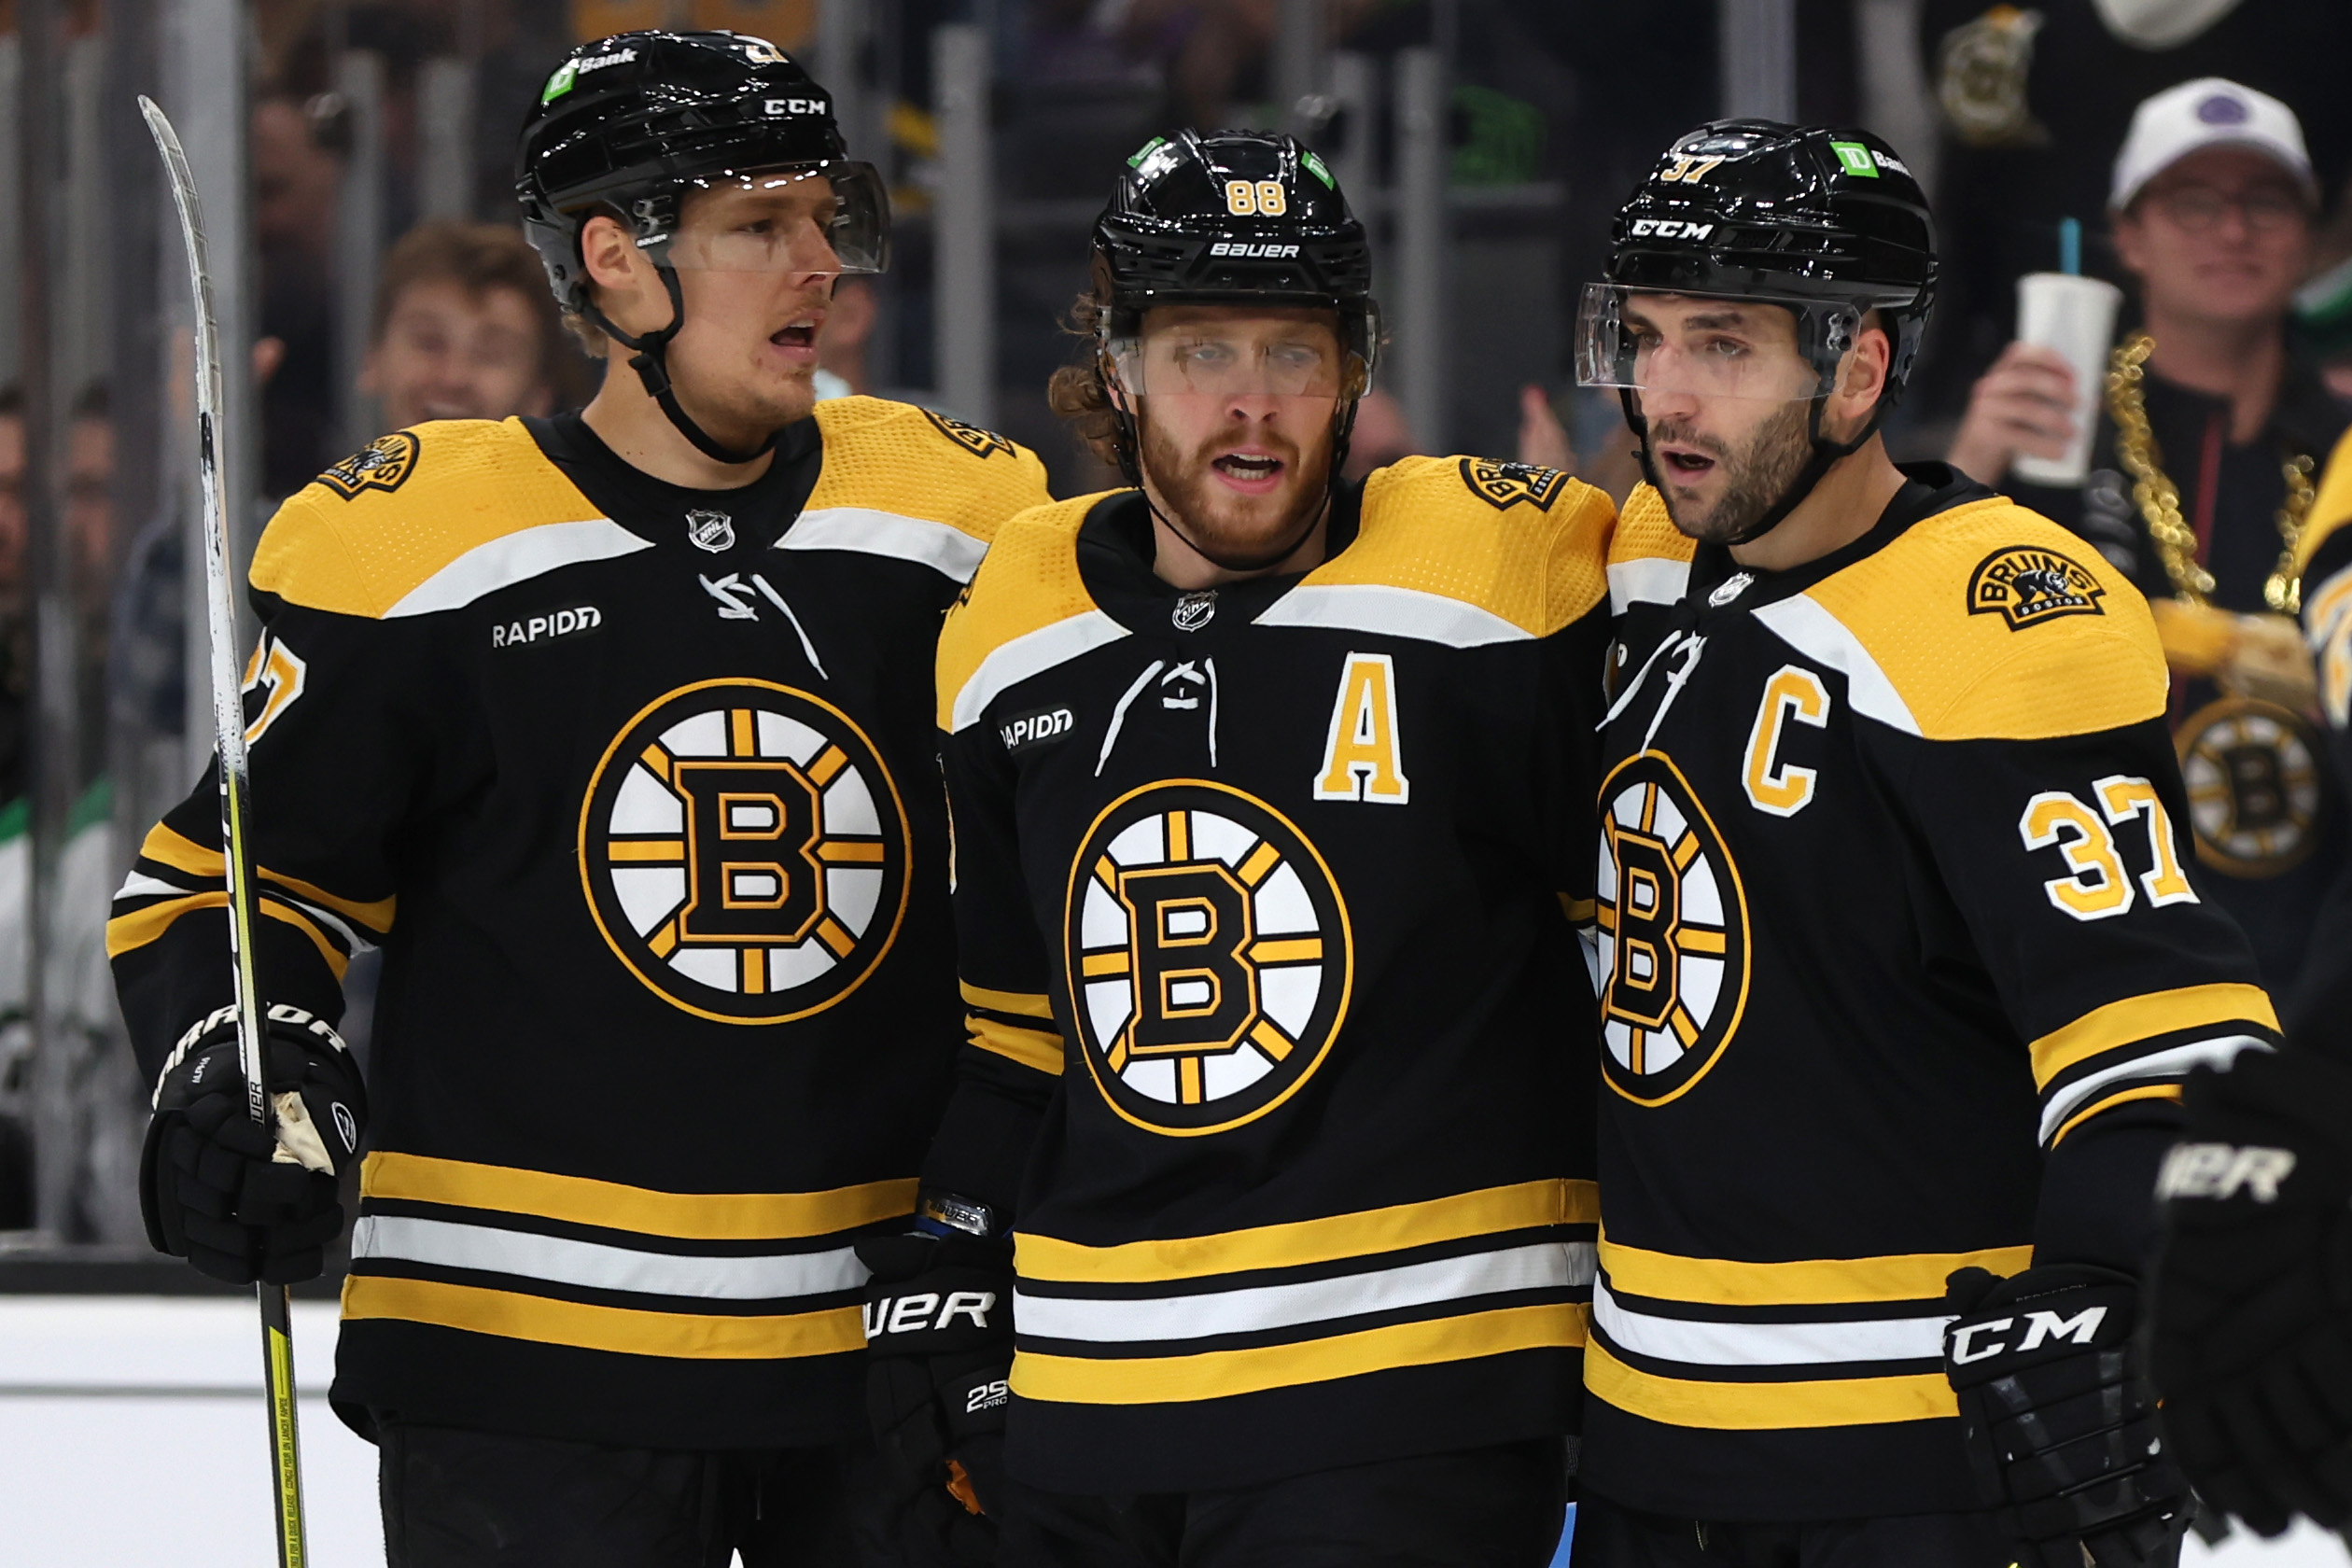 BREAKING: Patrice Bergeron announces retirement from Bruins